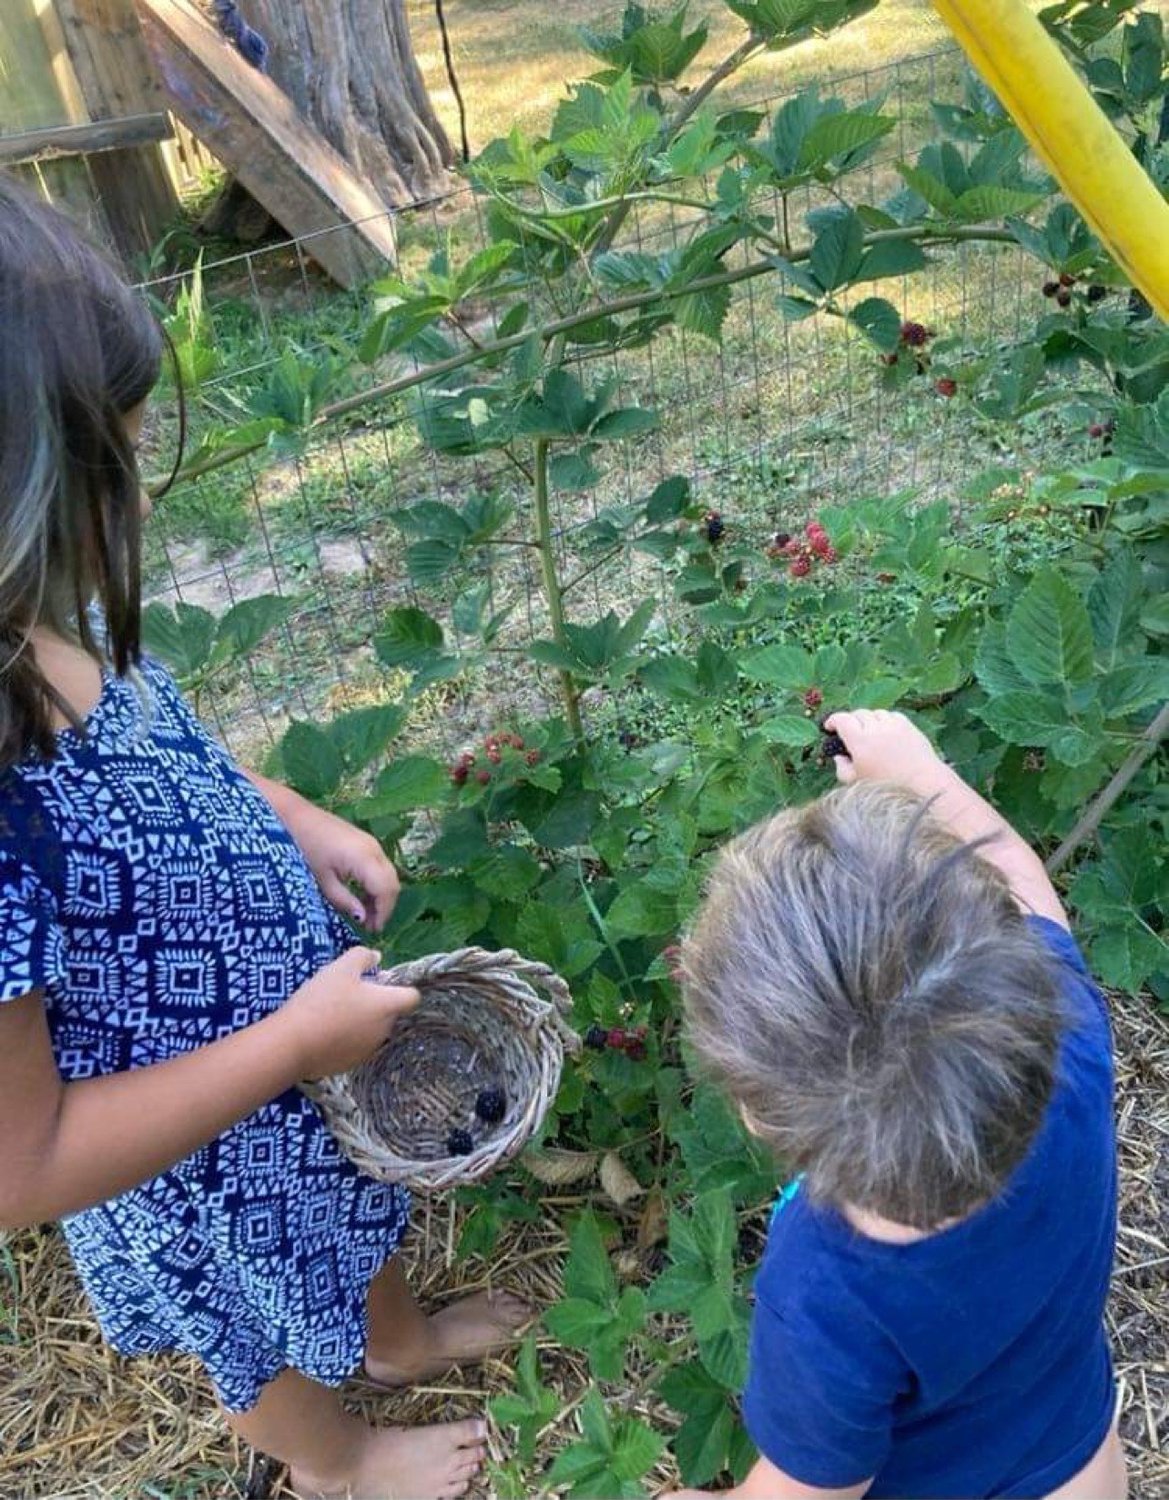 The Bitting kids take a moment to get outside and learn about growing and harvesting food.